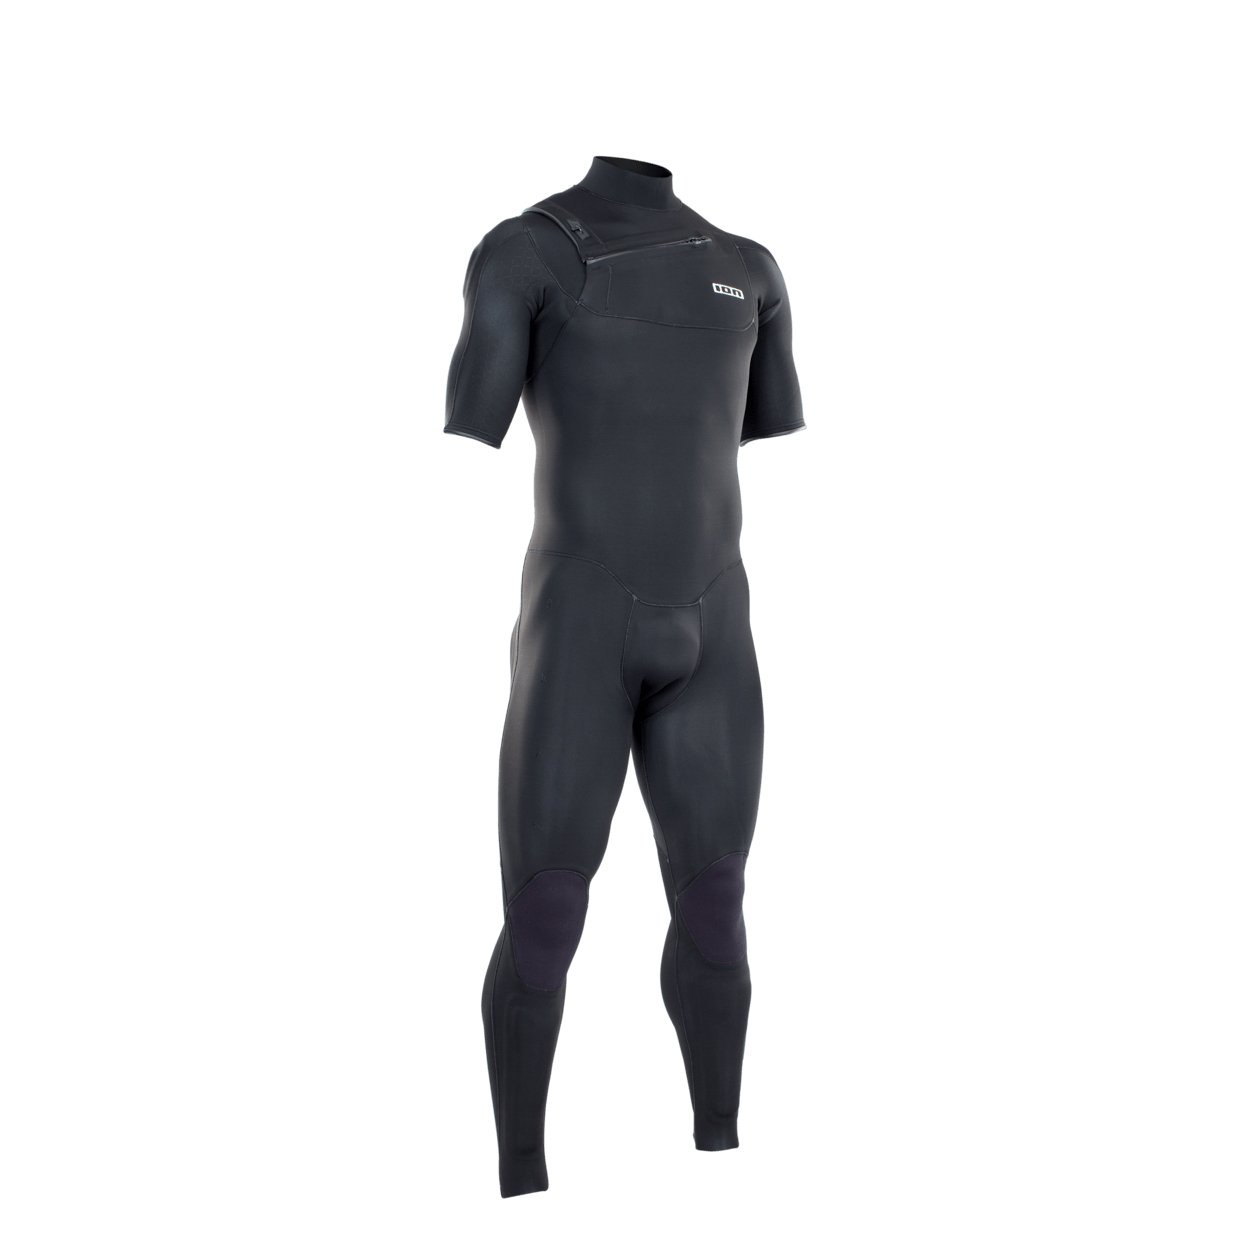 ION Men Wetsuit Protection Suit 3/2 Shortsleeve Front Zip 2021 - Worthing Watersports - 9008415953288 - Wetsuits - ION Water